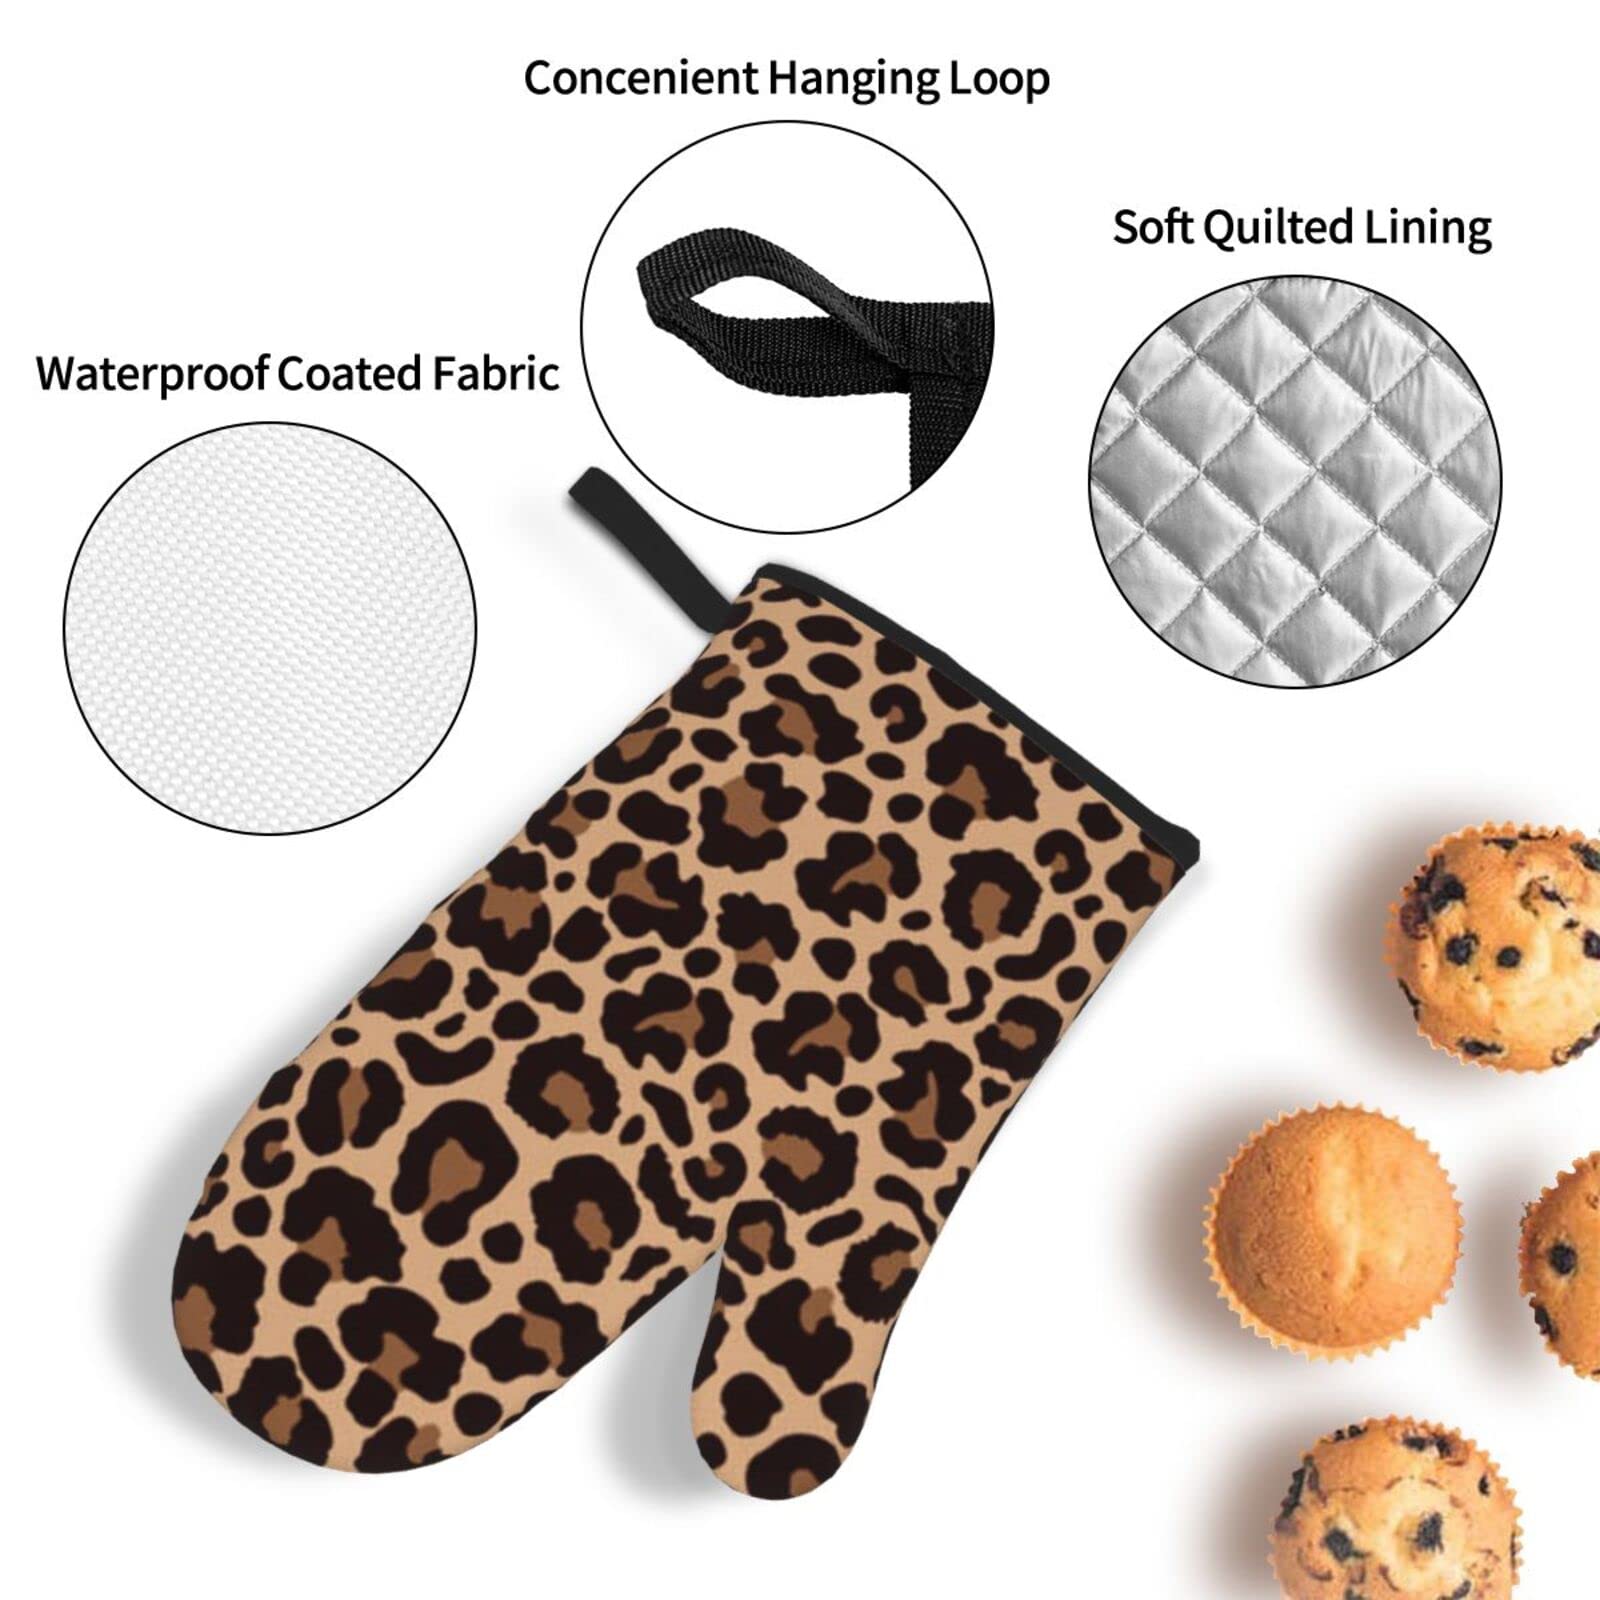 Leopard Print Oven Mitts and Pot Holders Sets,Non-Slip Heat Resistant Oven Gloves for Grilling Baking Cooking Kitchen Housewarming Gift